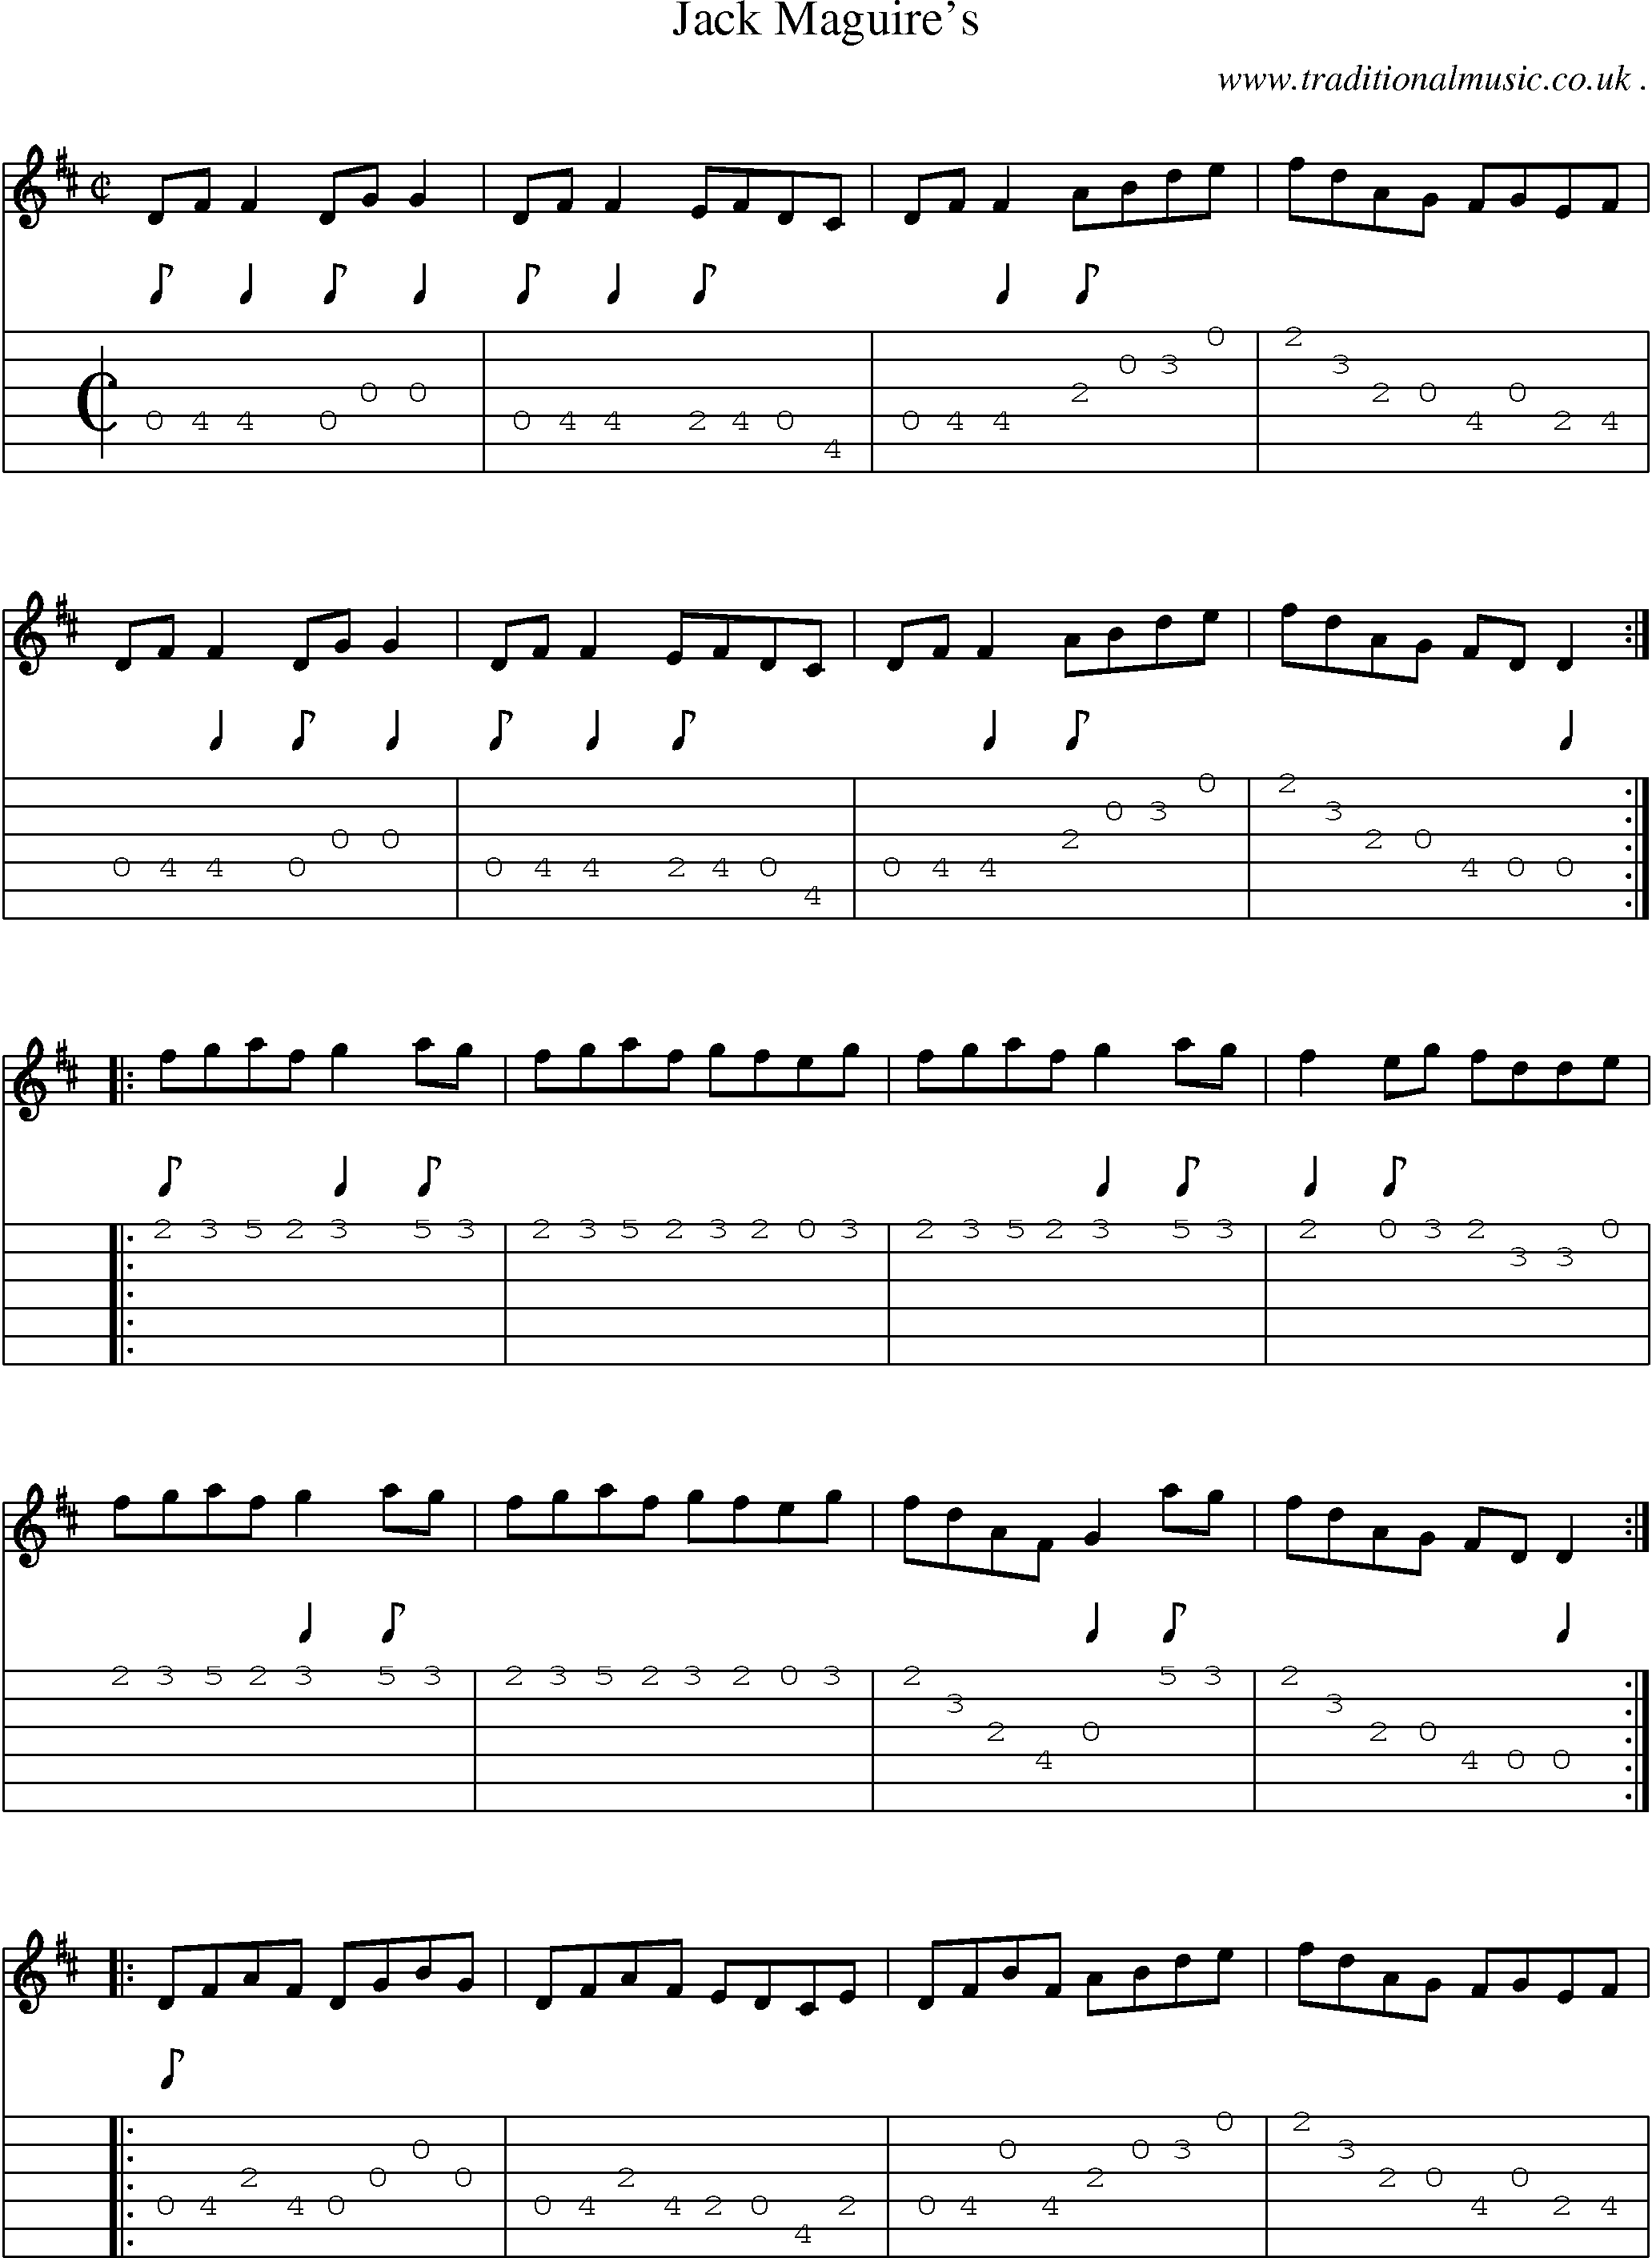 Sheet-Music and Guitar Tabs for Jack Maguires